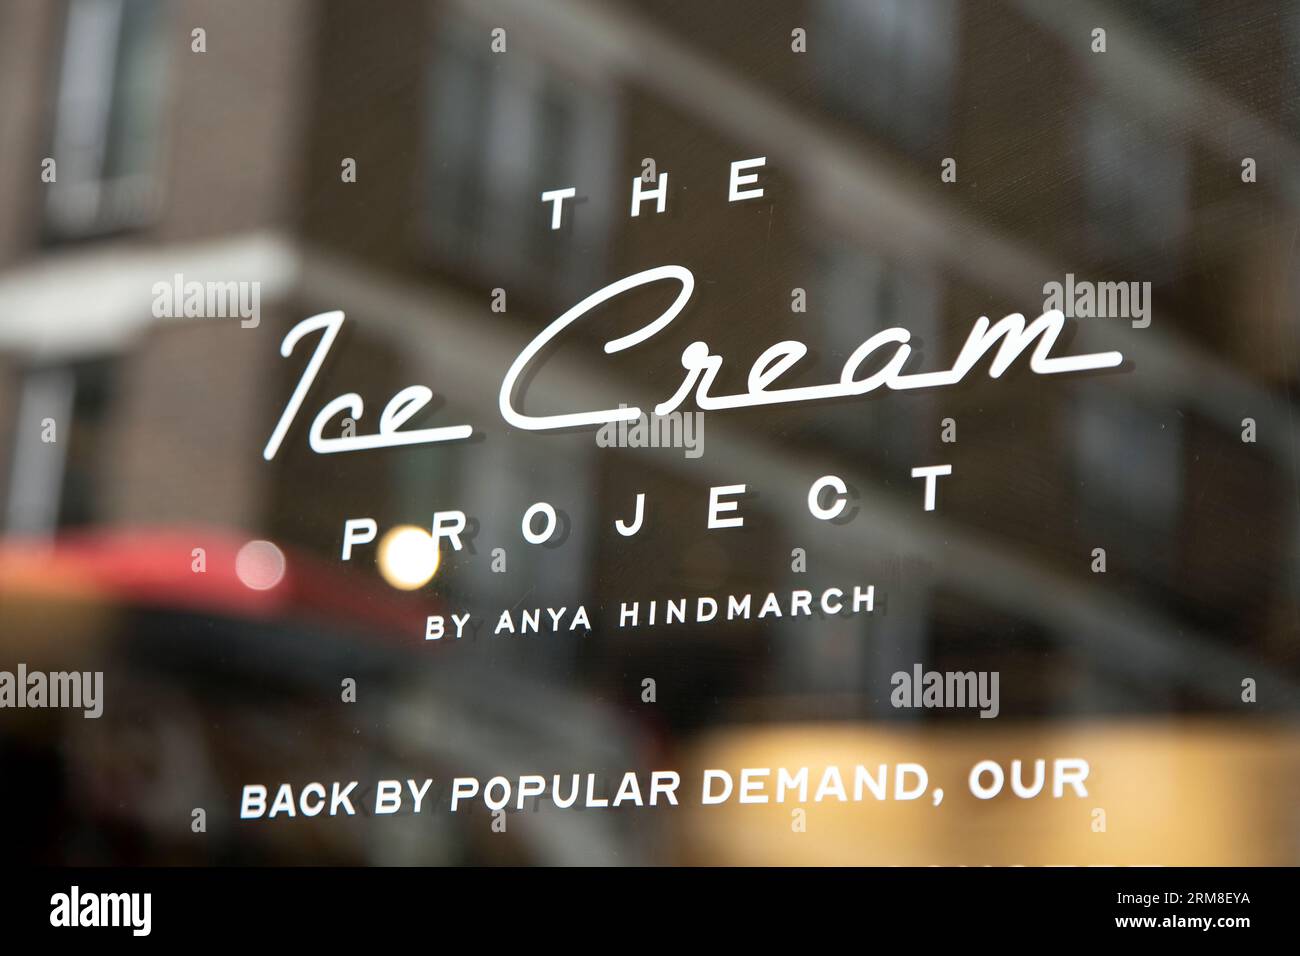 Vitrine Anya Hindmarch Ice Cream Project, Londres, Angleterre Banque D'Images